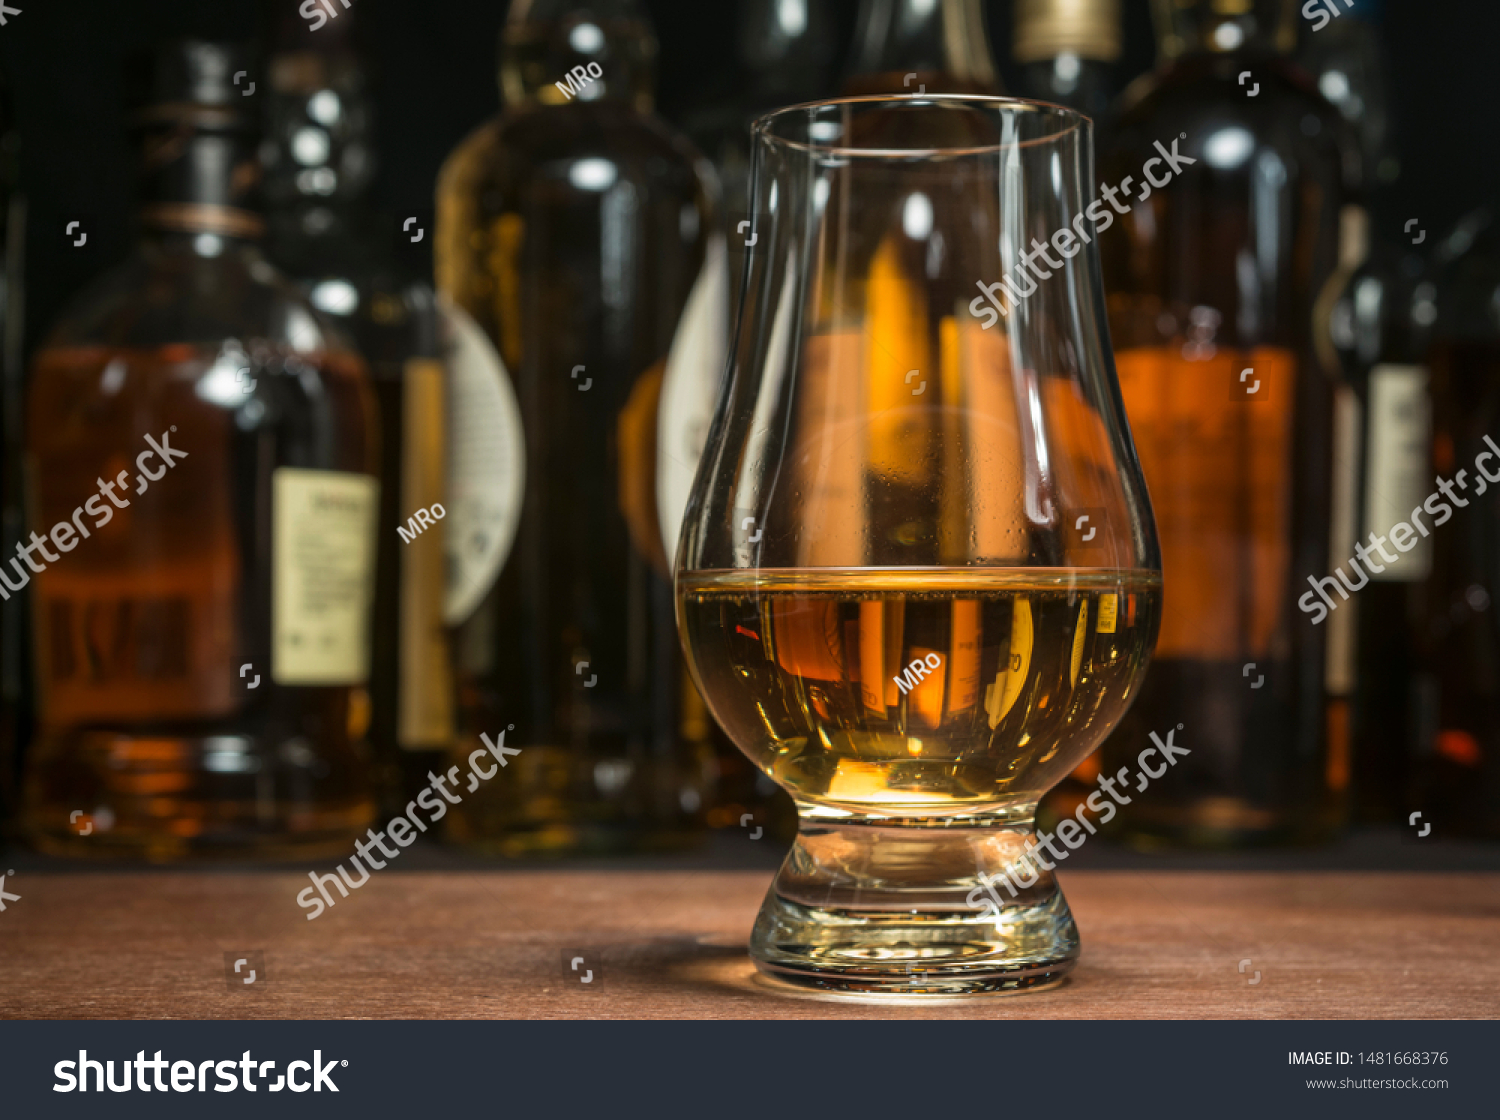 Scotch whisky in a traditional tasting glass. #1481668376